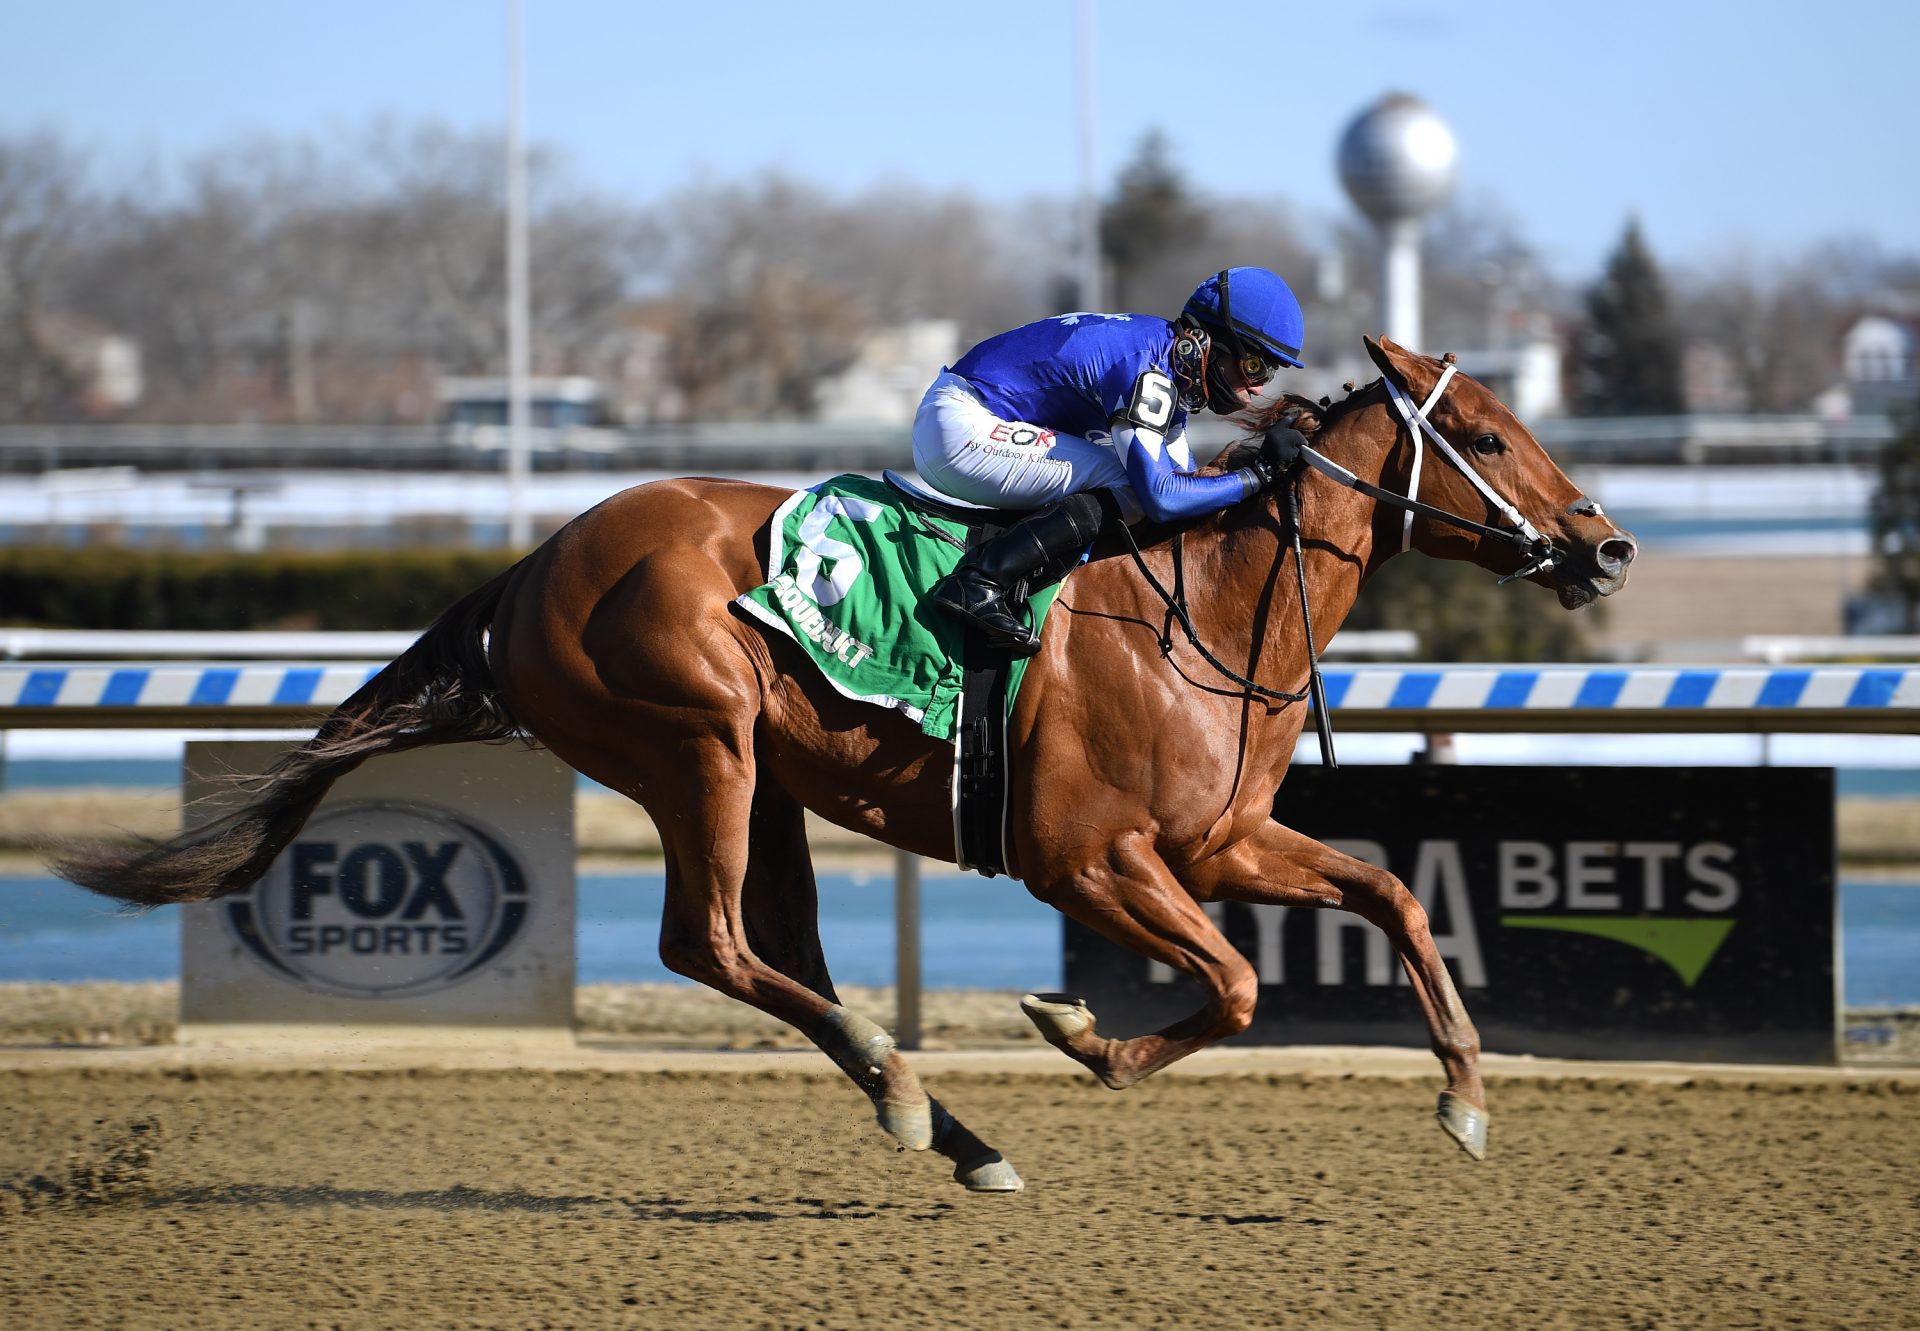 Morello (Classic Empire) winning the Jimmy Winkfield Stakes at Aqueduct